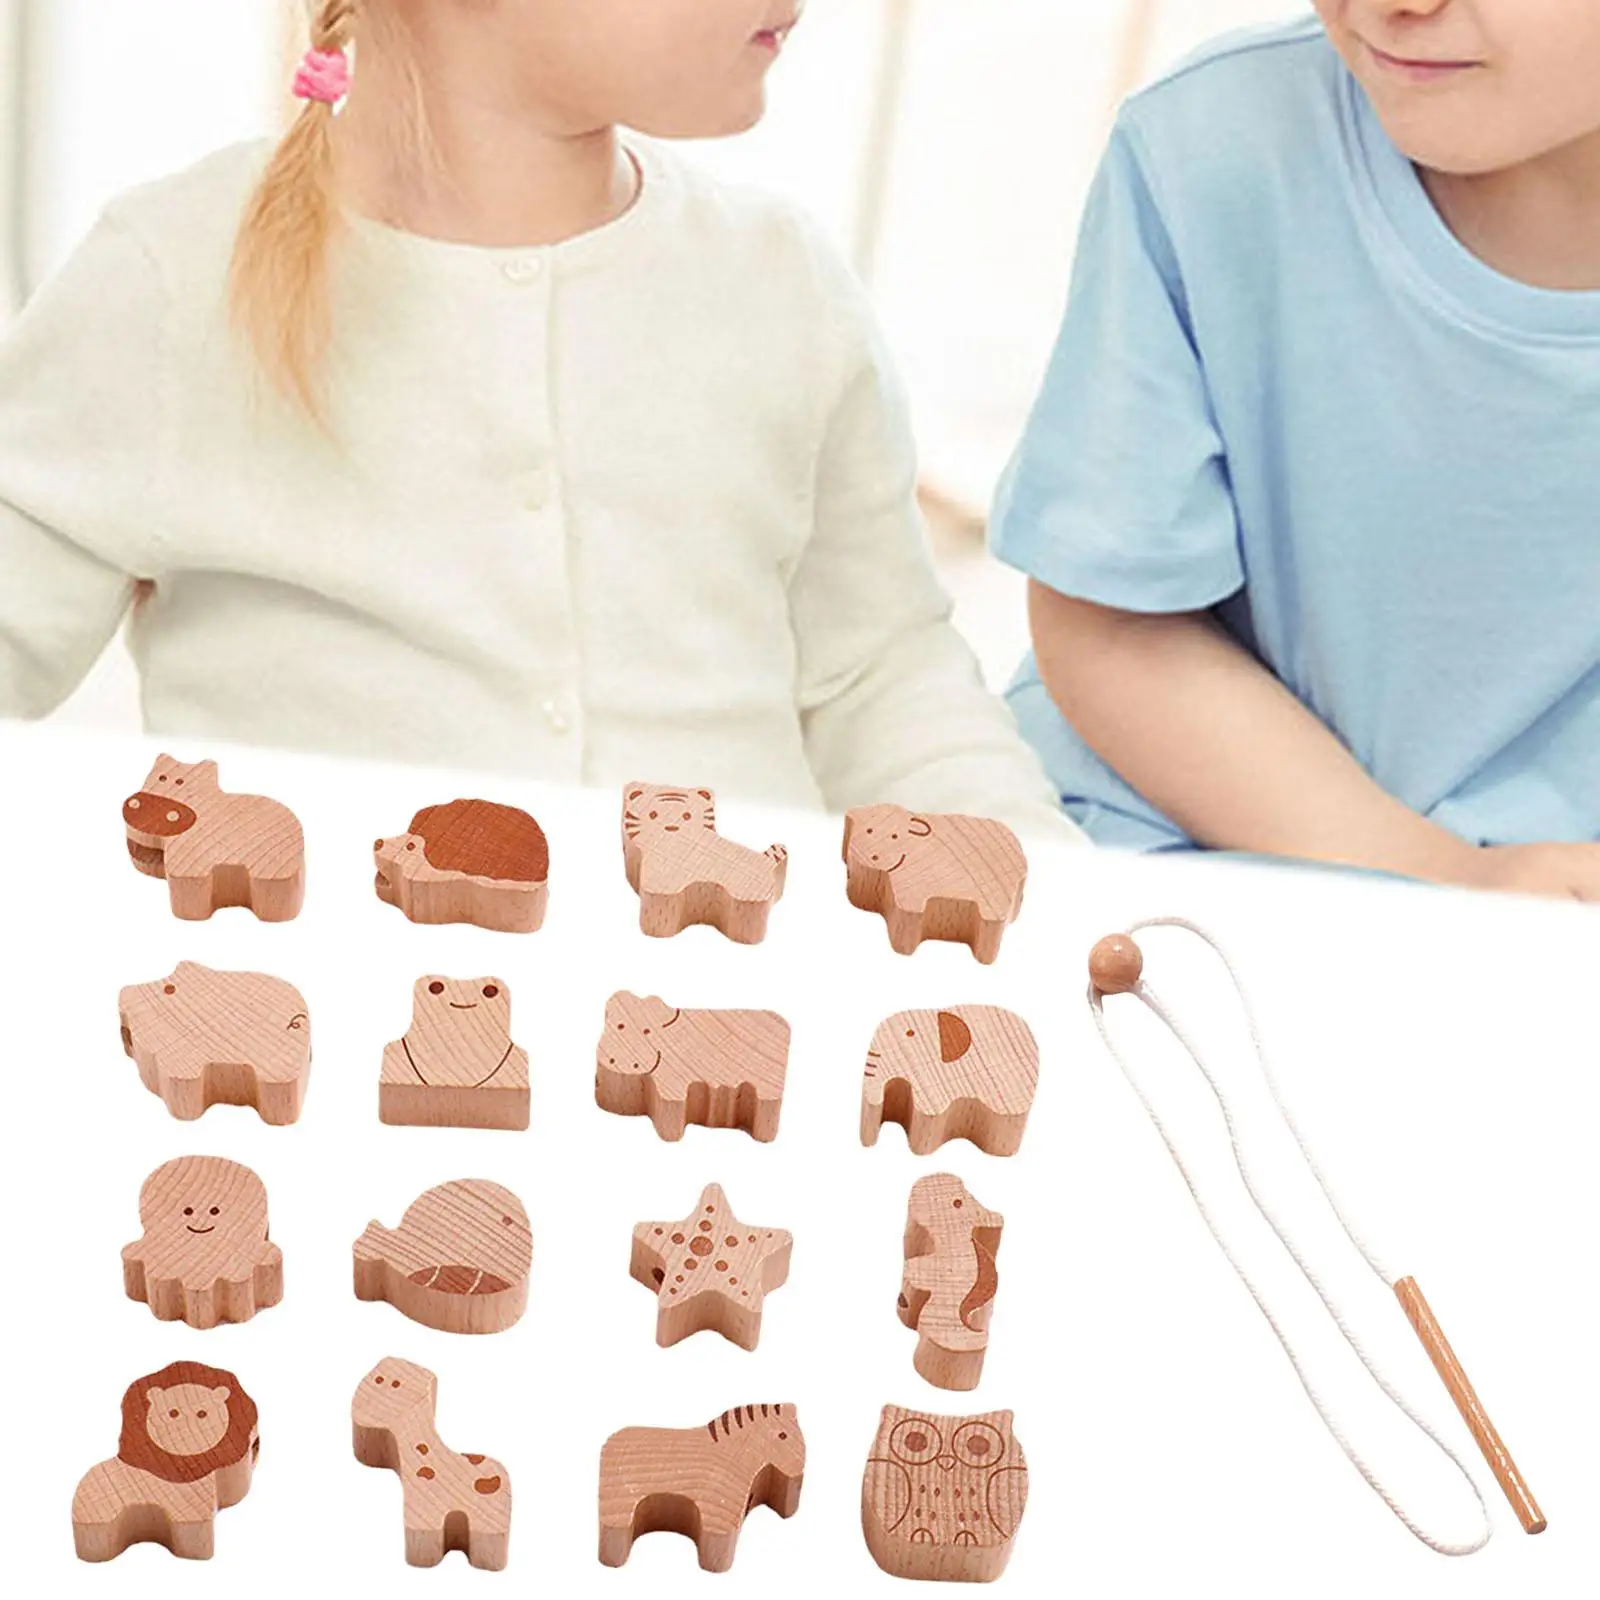 Lacing Beads Toys Developing Intelligence Learning Toys for Holiday Gifts